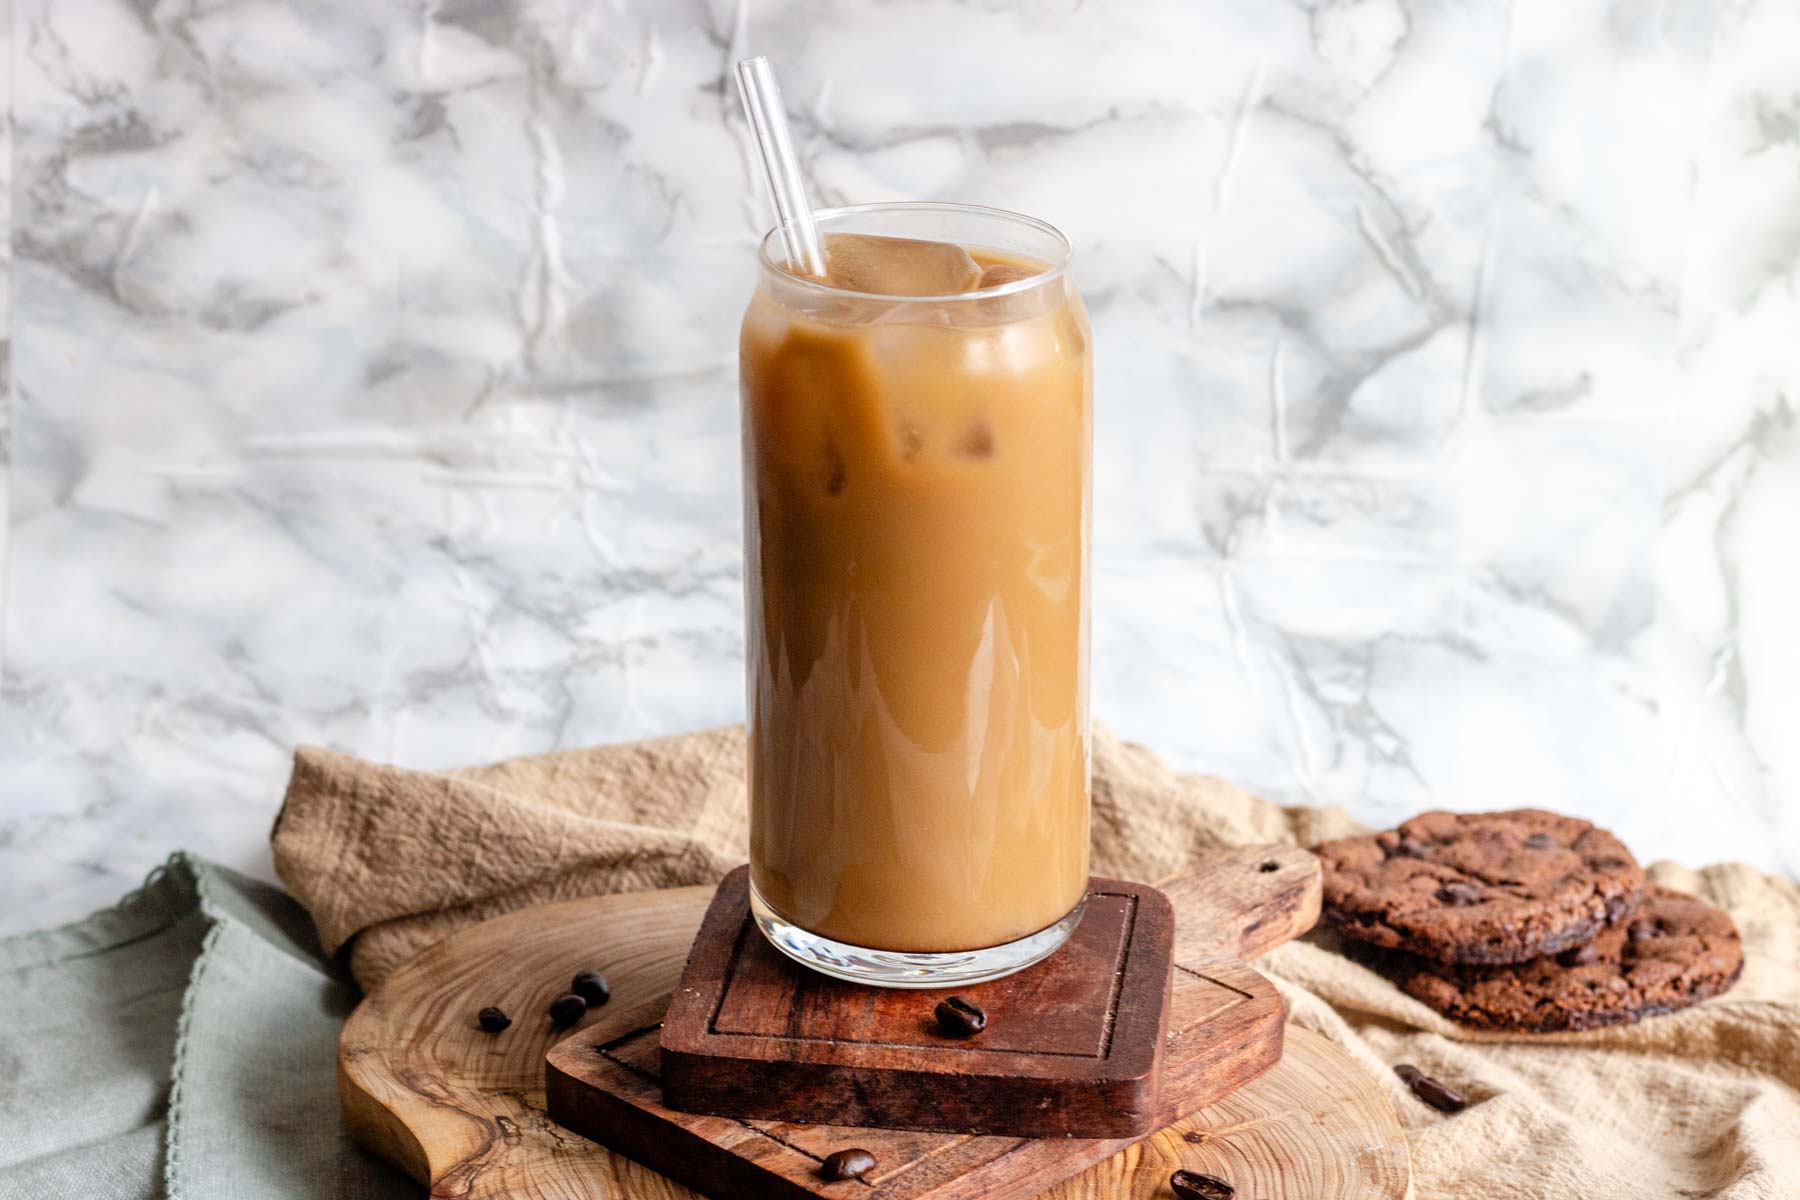 Vegan cold coffee in a glass with a straw on a wooden board.